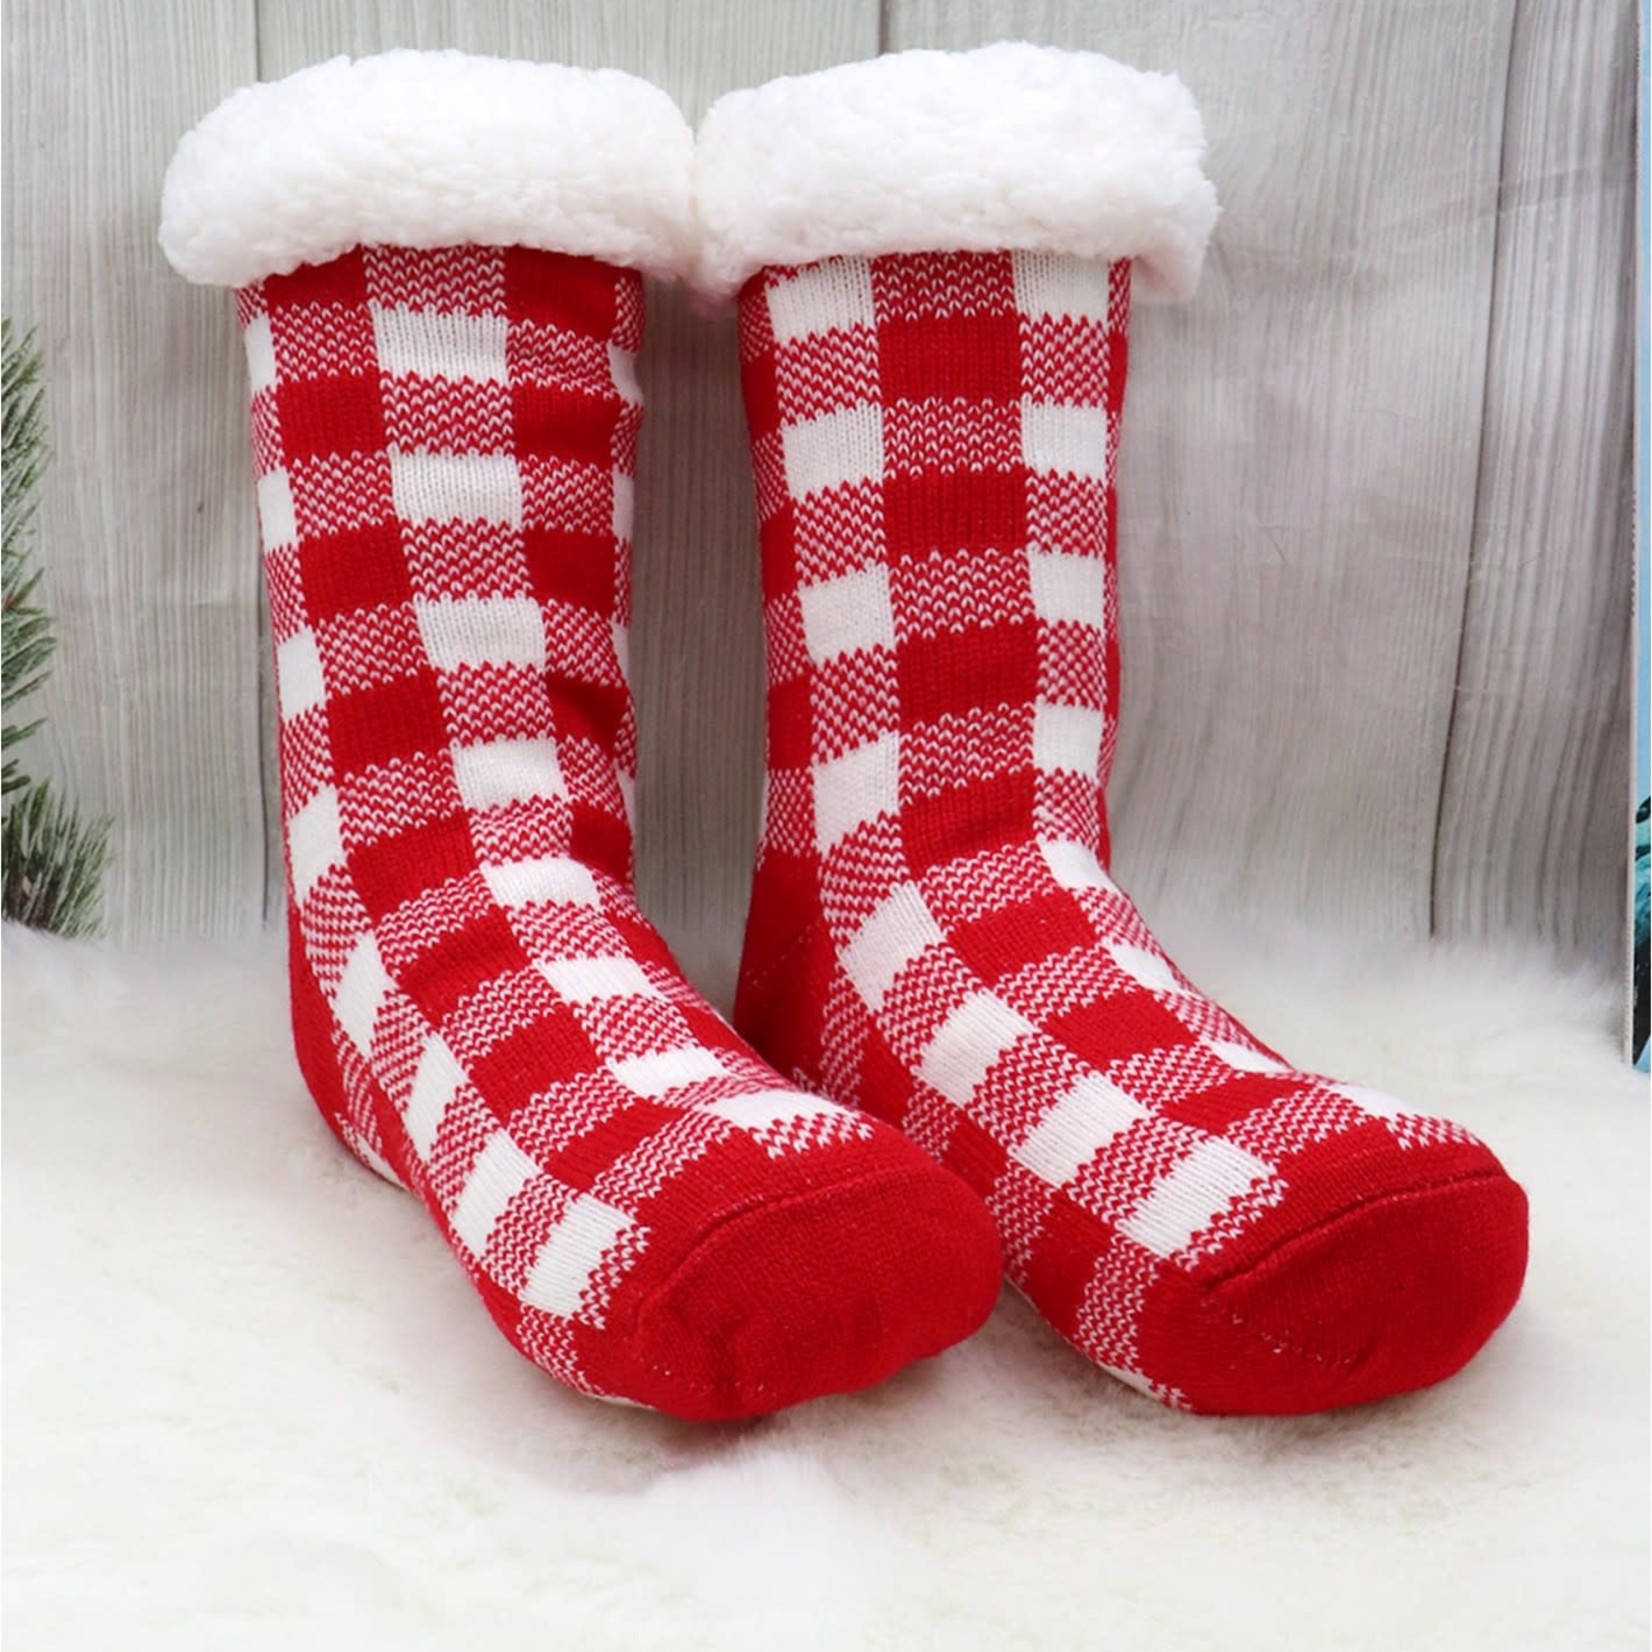 Plaid Indoor Anti-Skid Slipper Socks Red/White - Klomps Home and